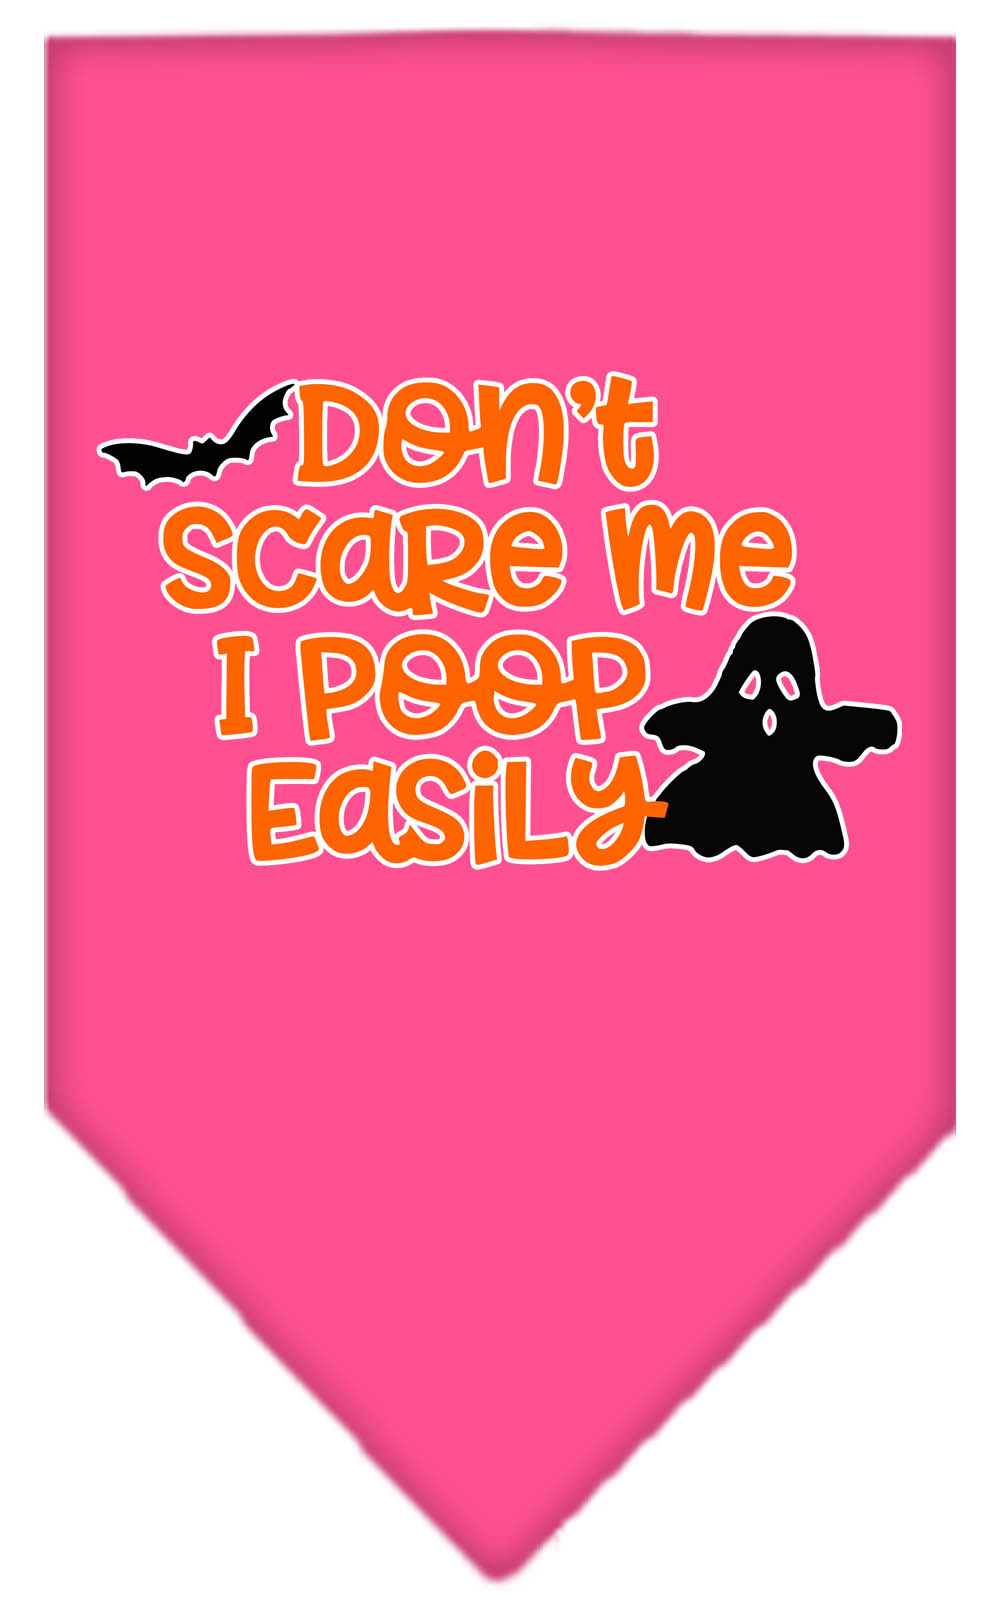 Don't Scare Me, Poops Easily Screen Print Bandana Bright Pink Large